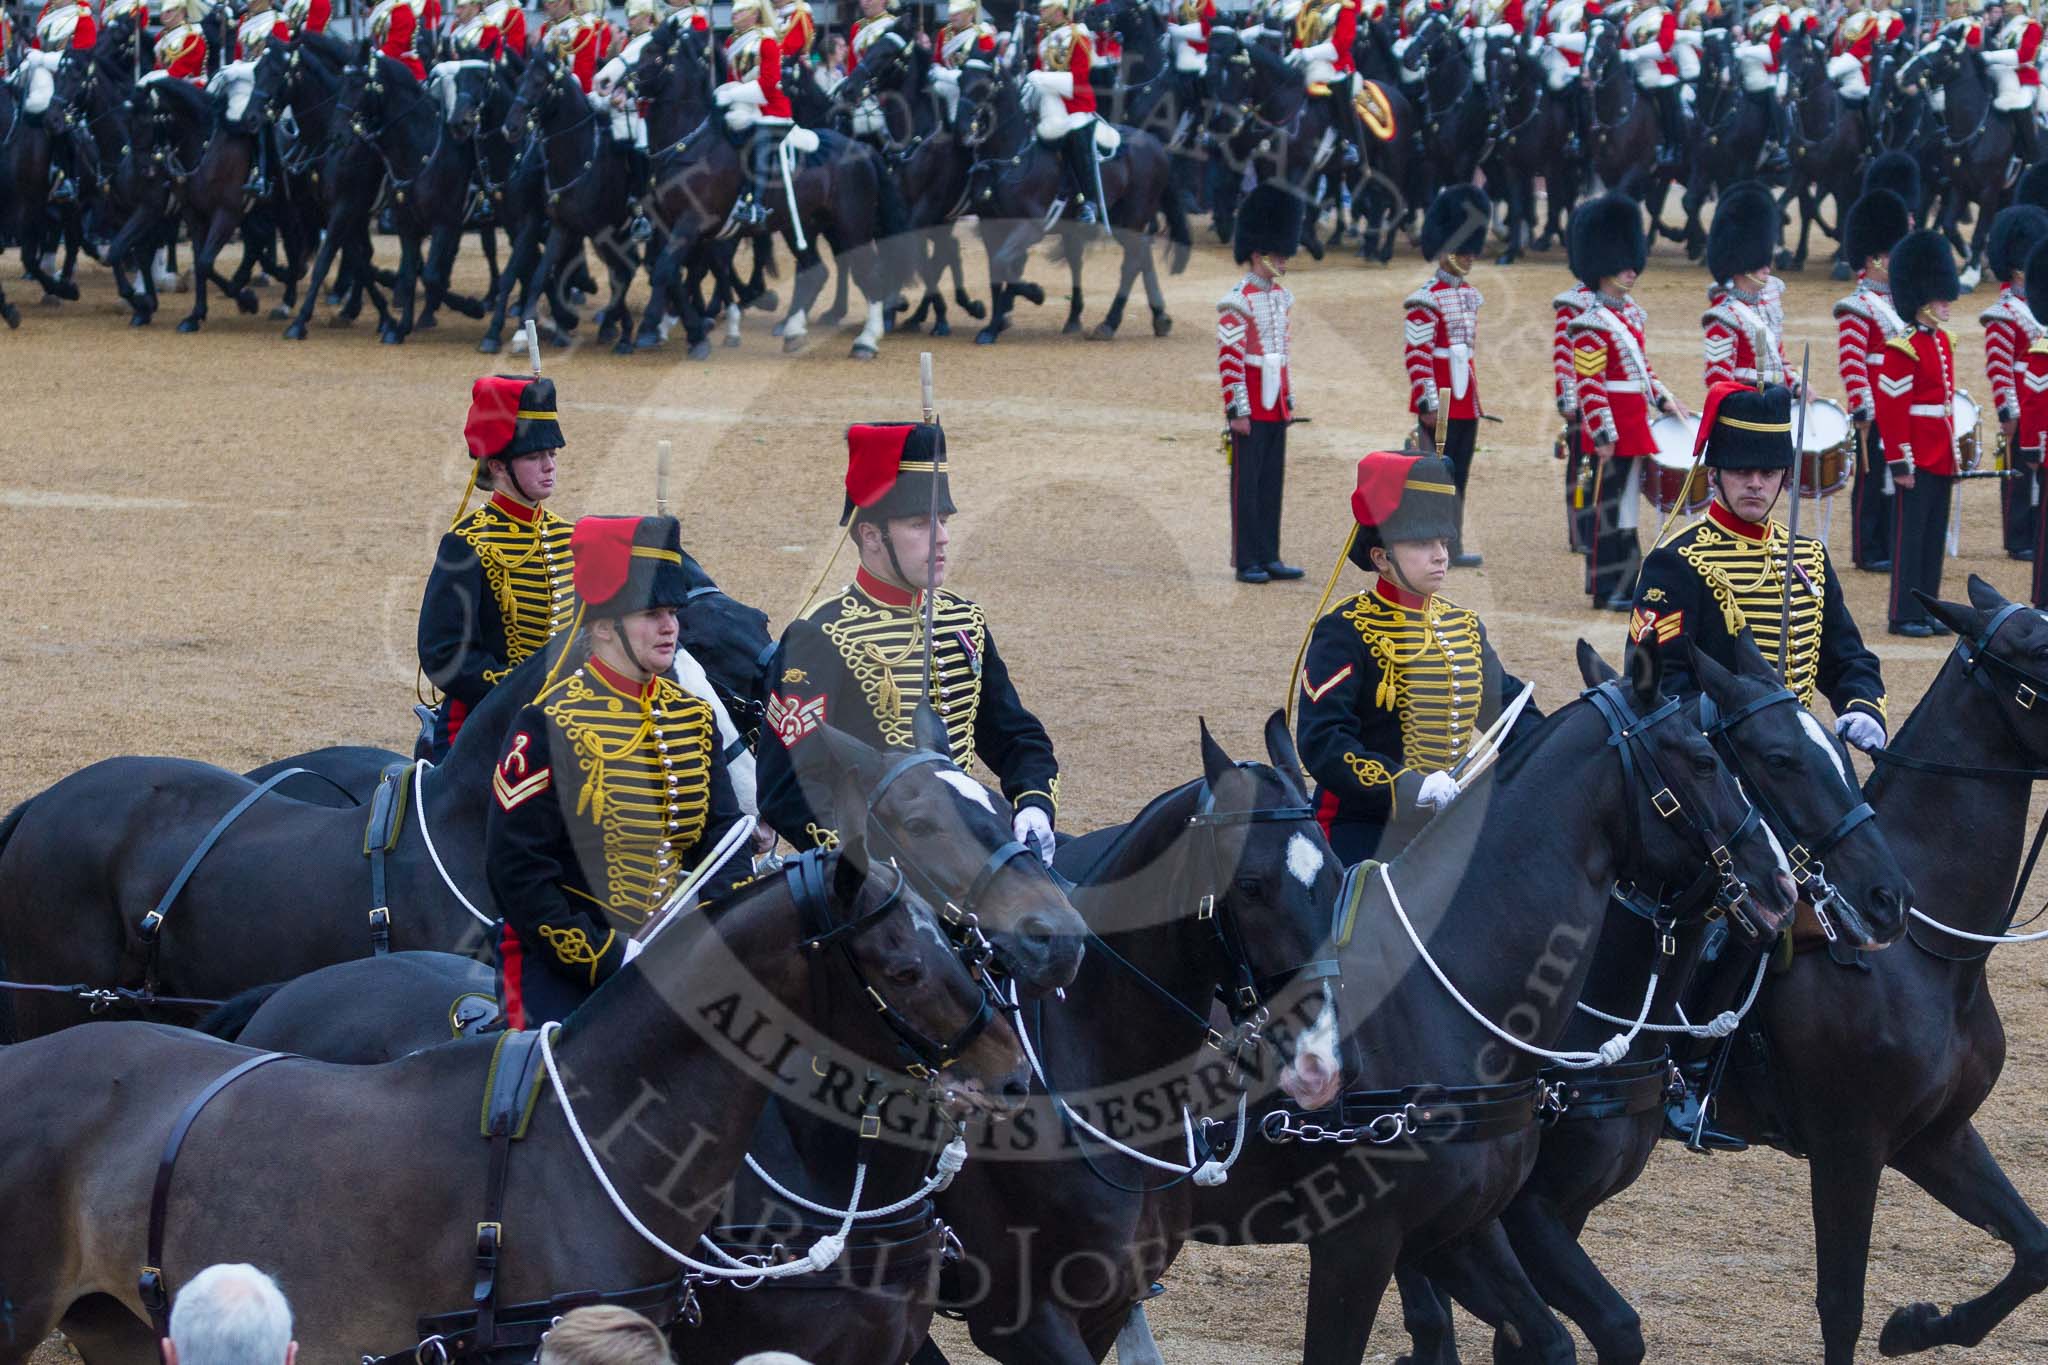 Trooping the Colour 2015. Image #585, 13 June 2015 11:57 Horse Guards Parade, London, UK